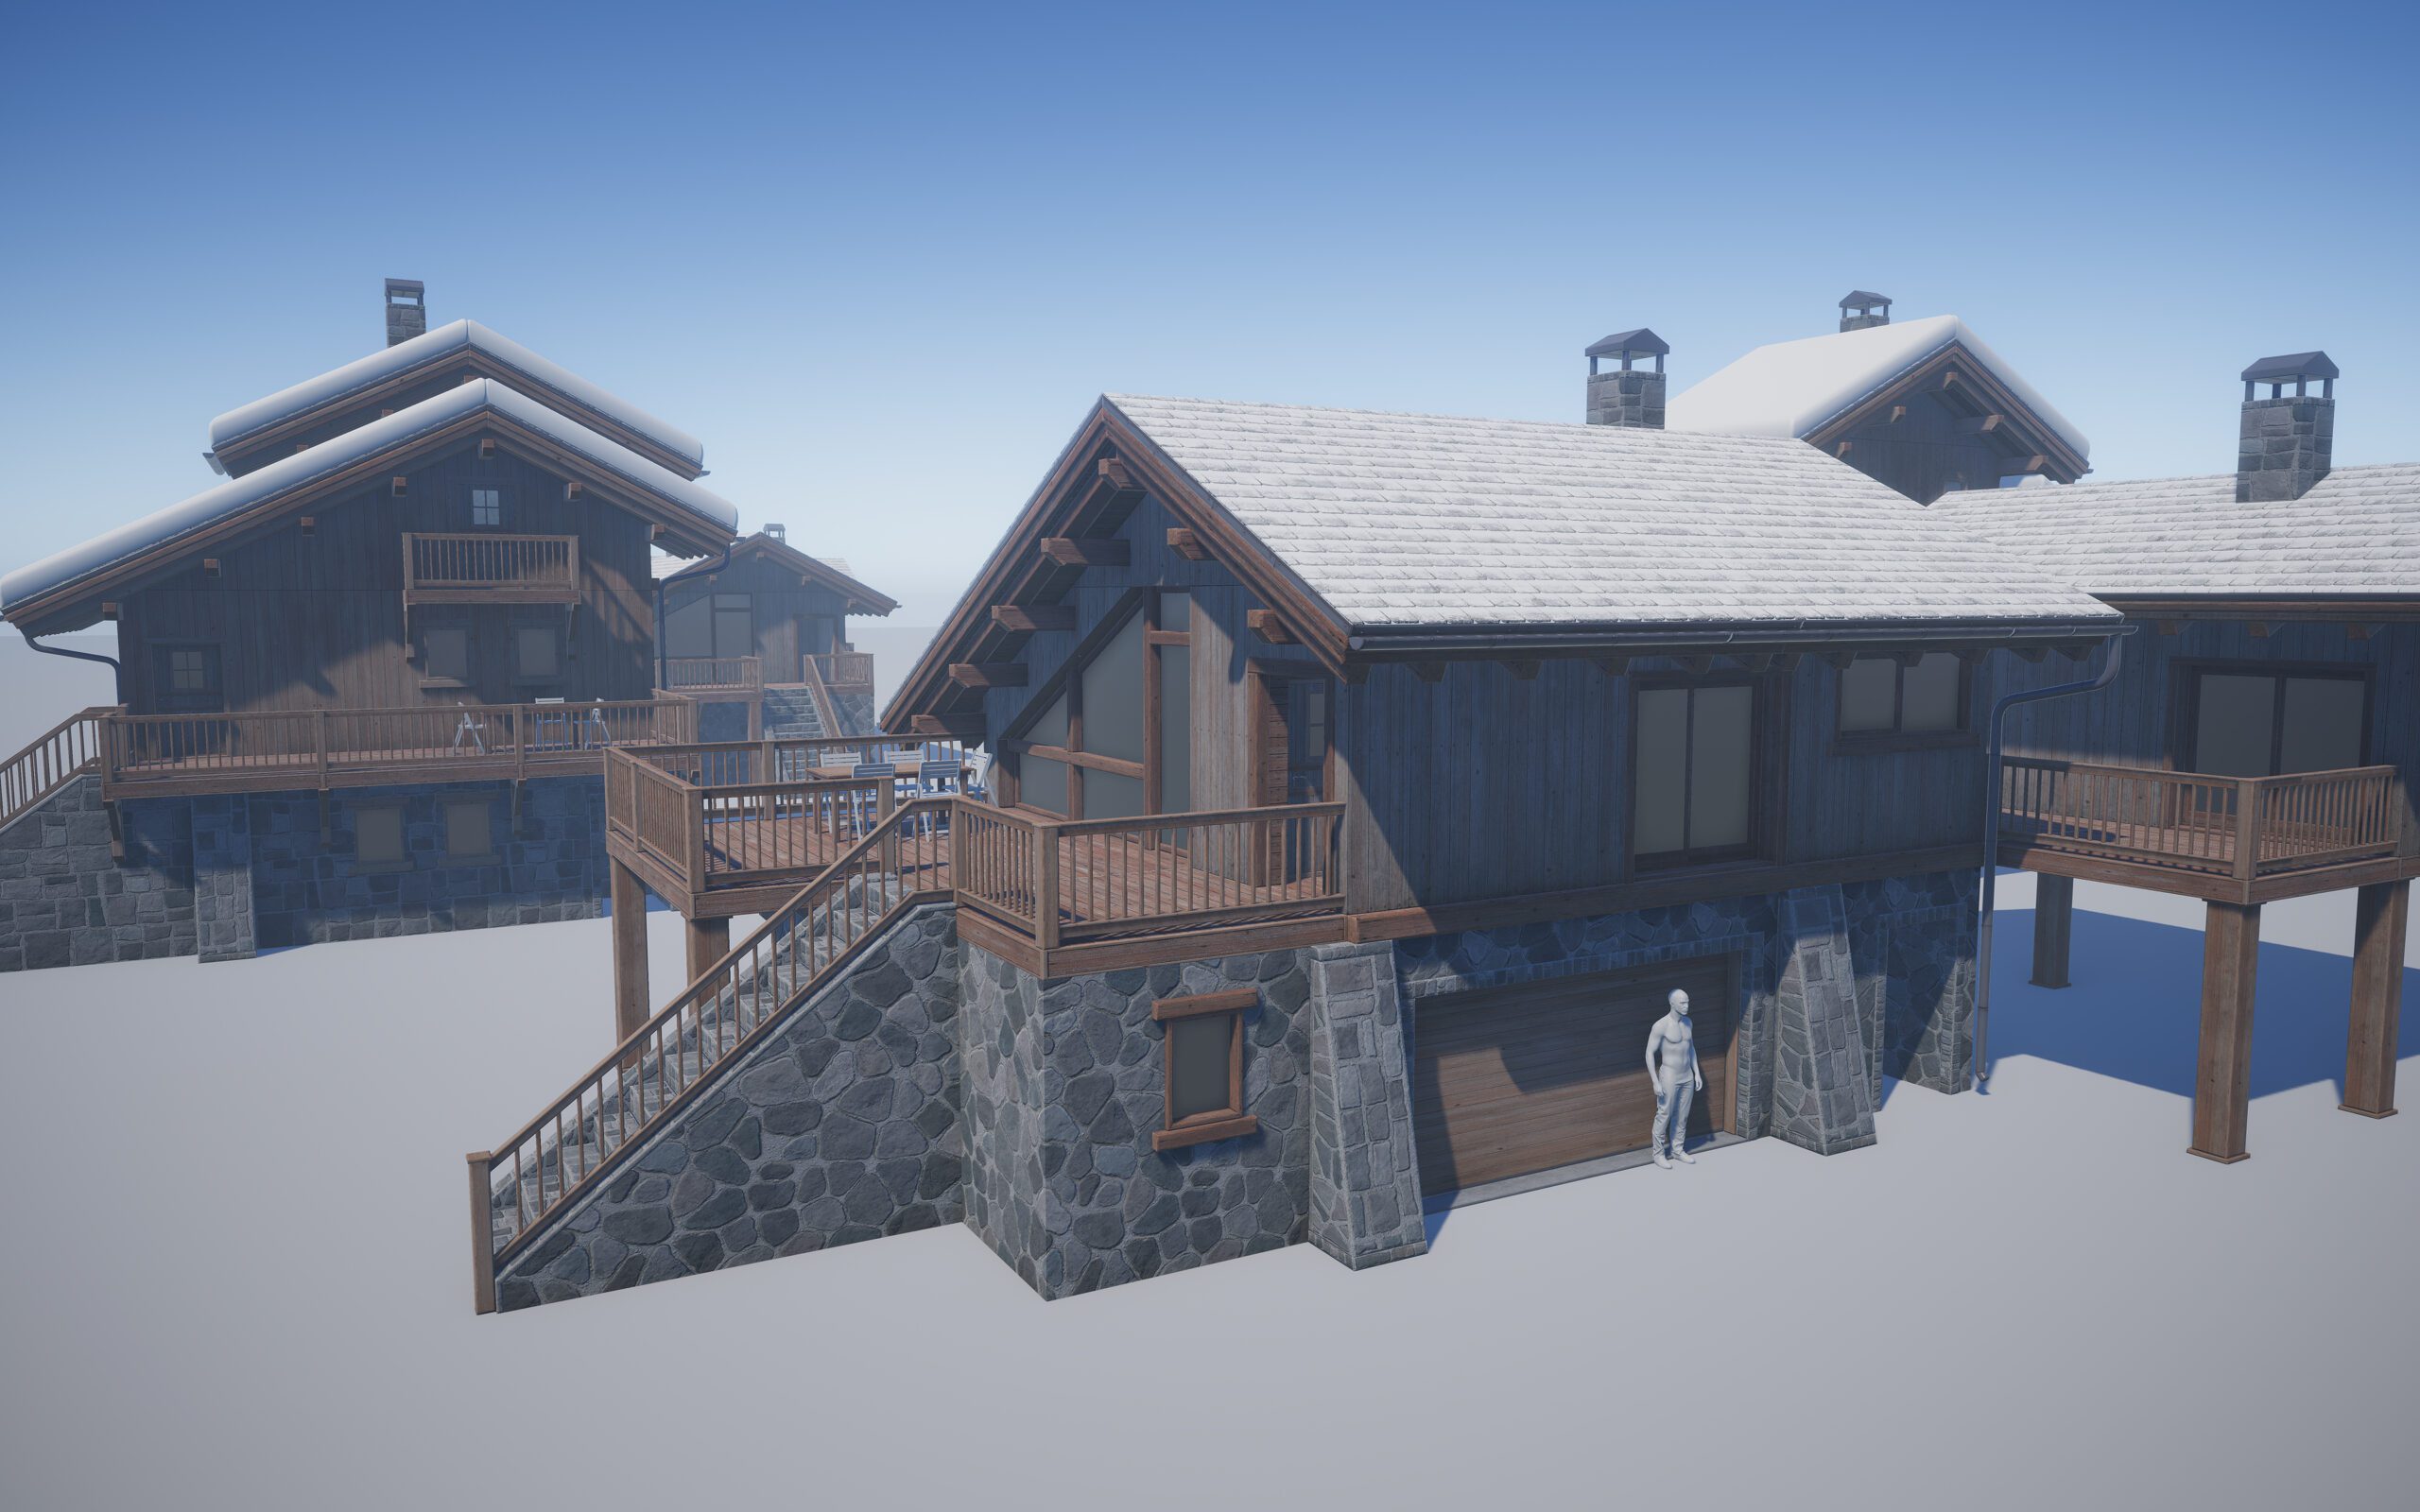 WIP screenshot of the modular chalet game asset made for Shredders